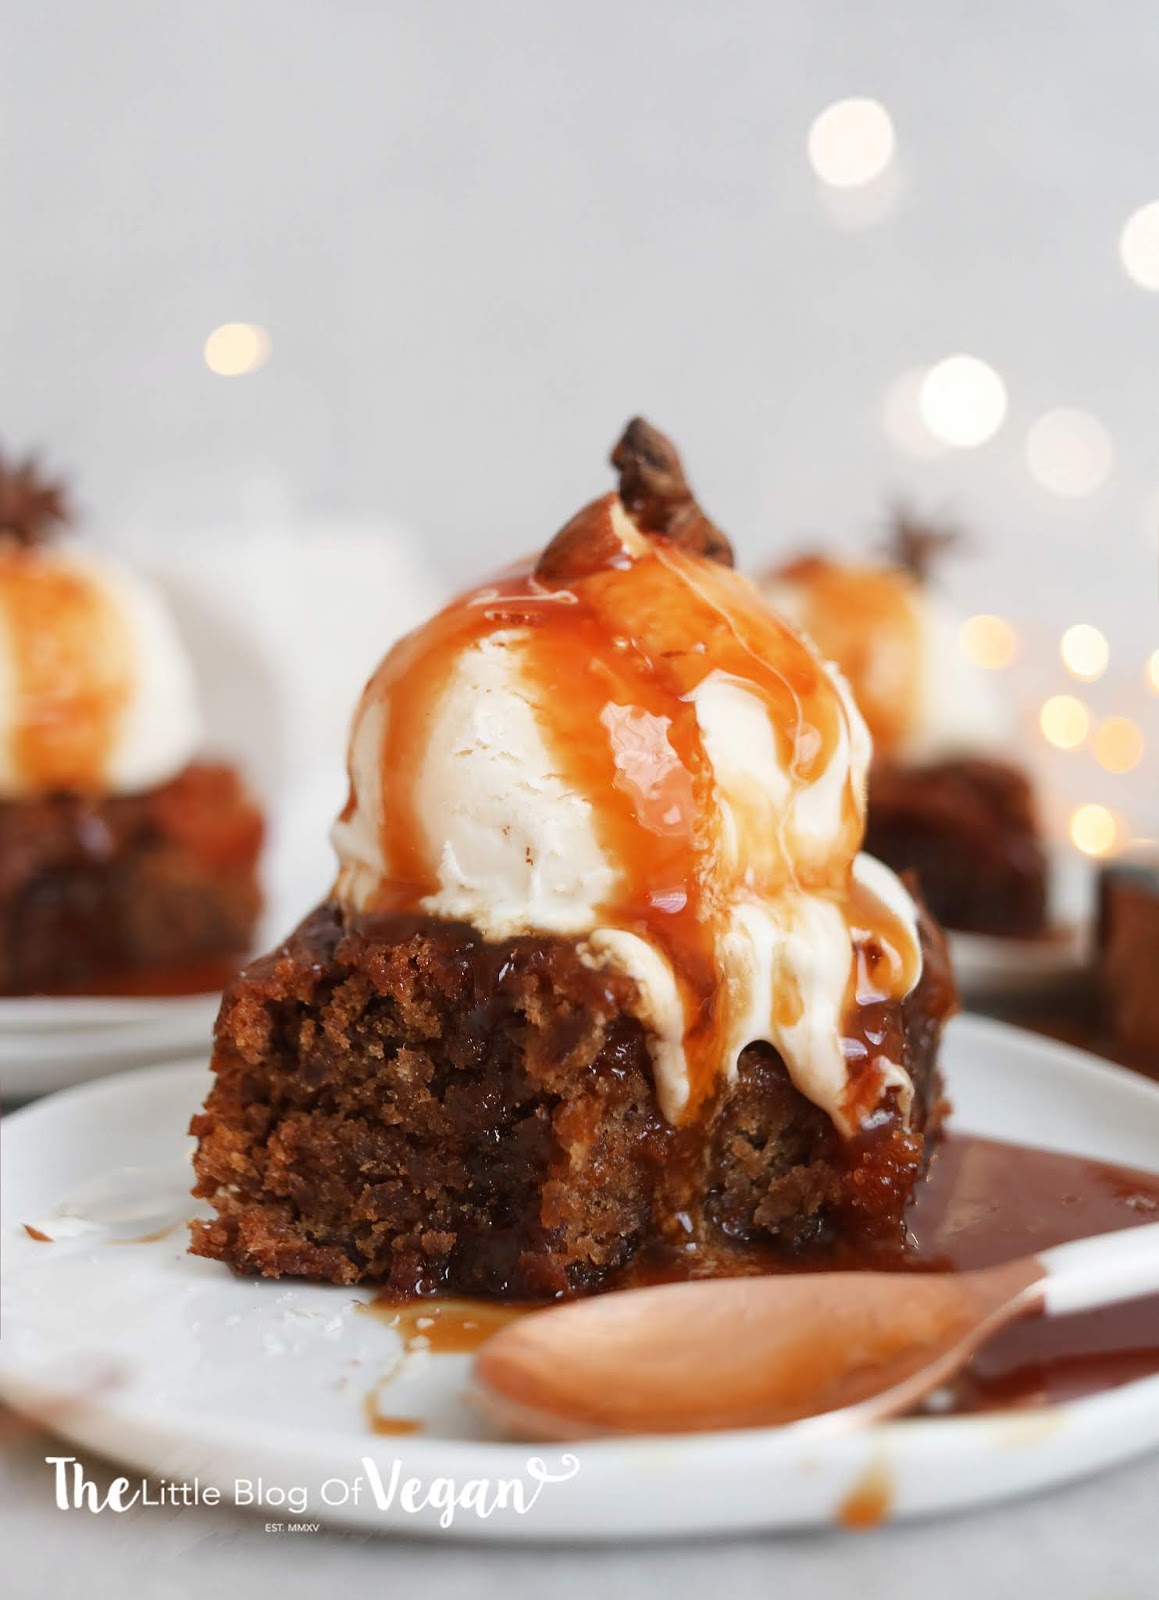 The best vegan sticky toffee pudding recipe | The Little Blog Of Vegan